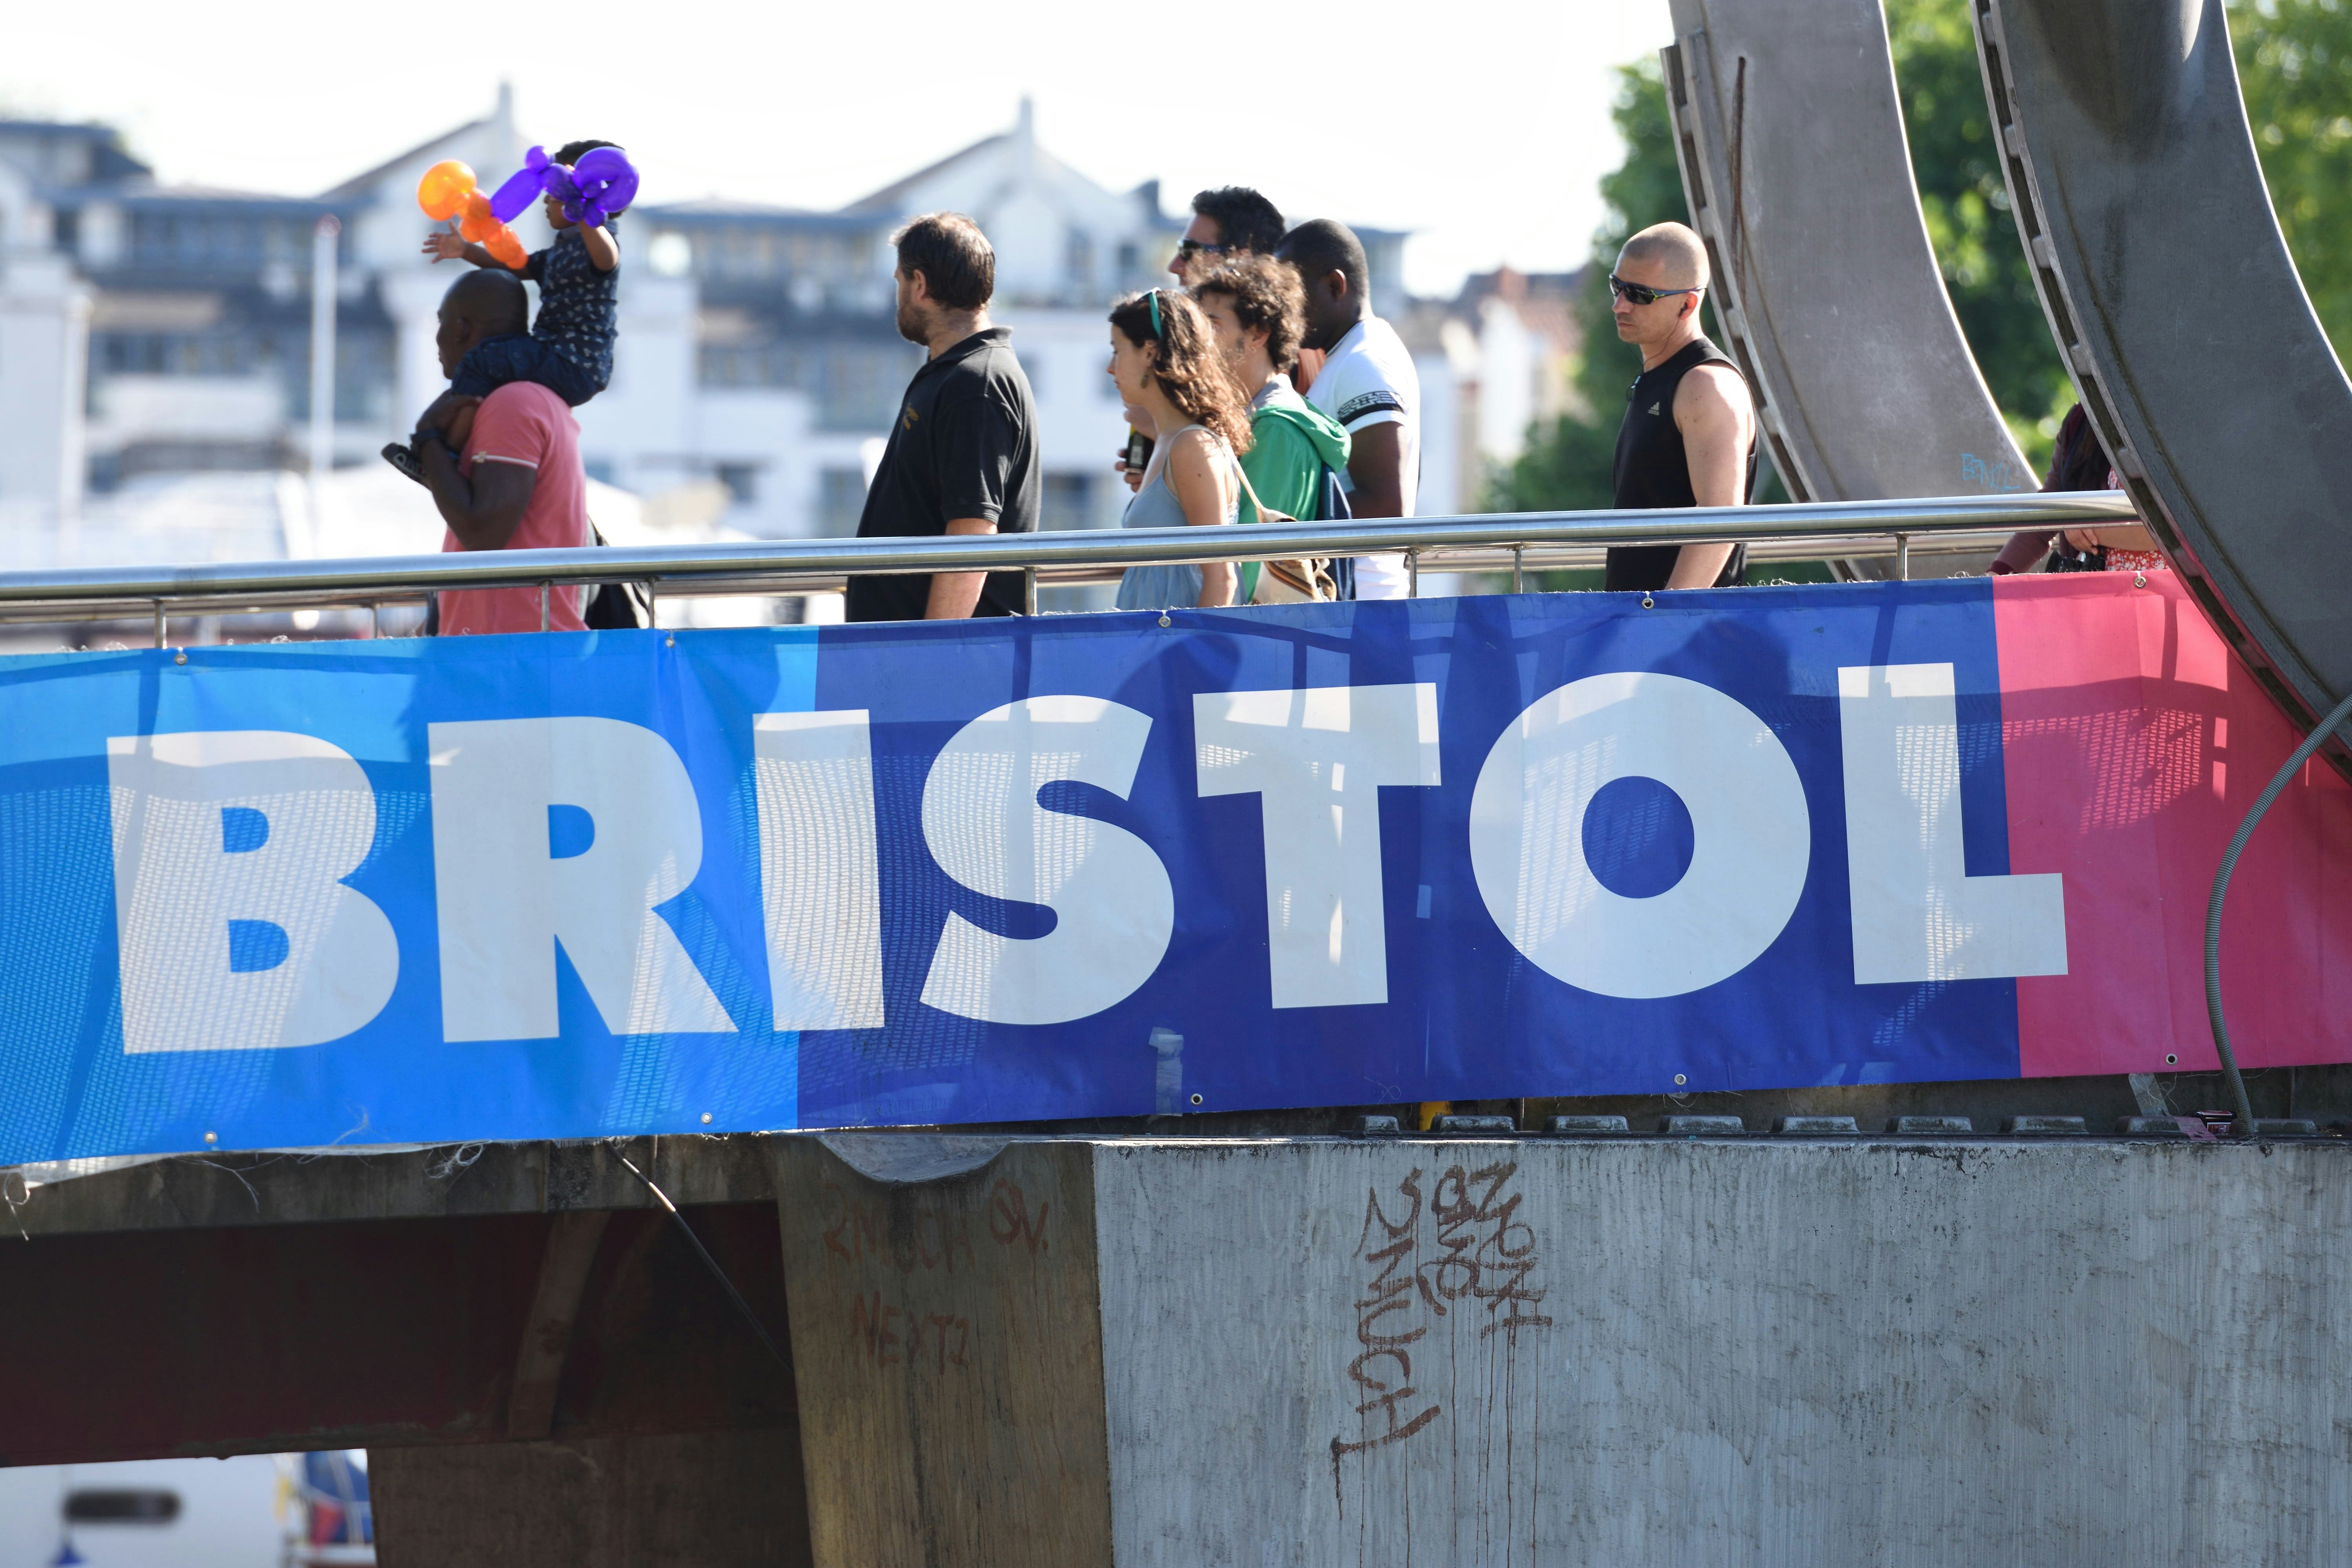 People of different ages, races and genders walking across a bridge. The bridge has a banner with the word 'Bristol' on its side.